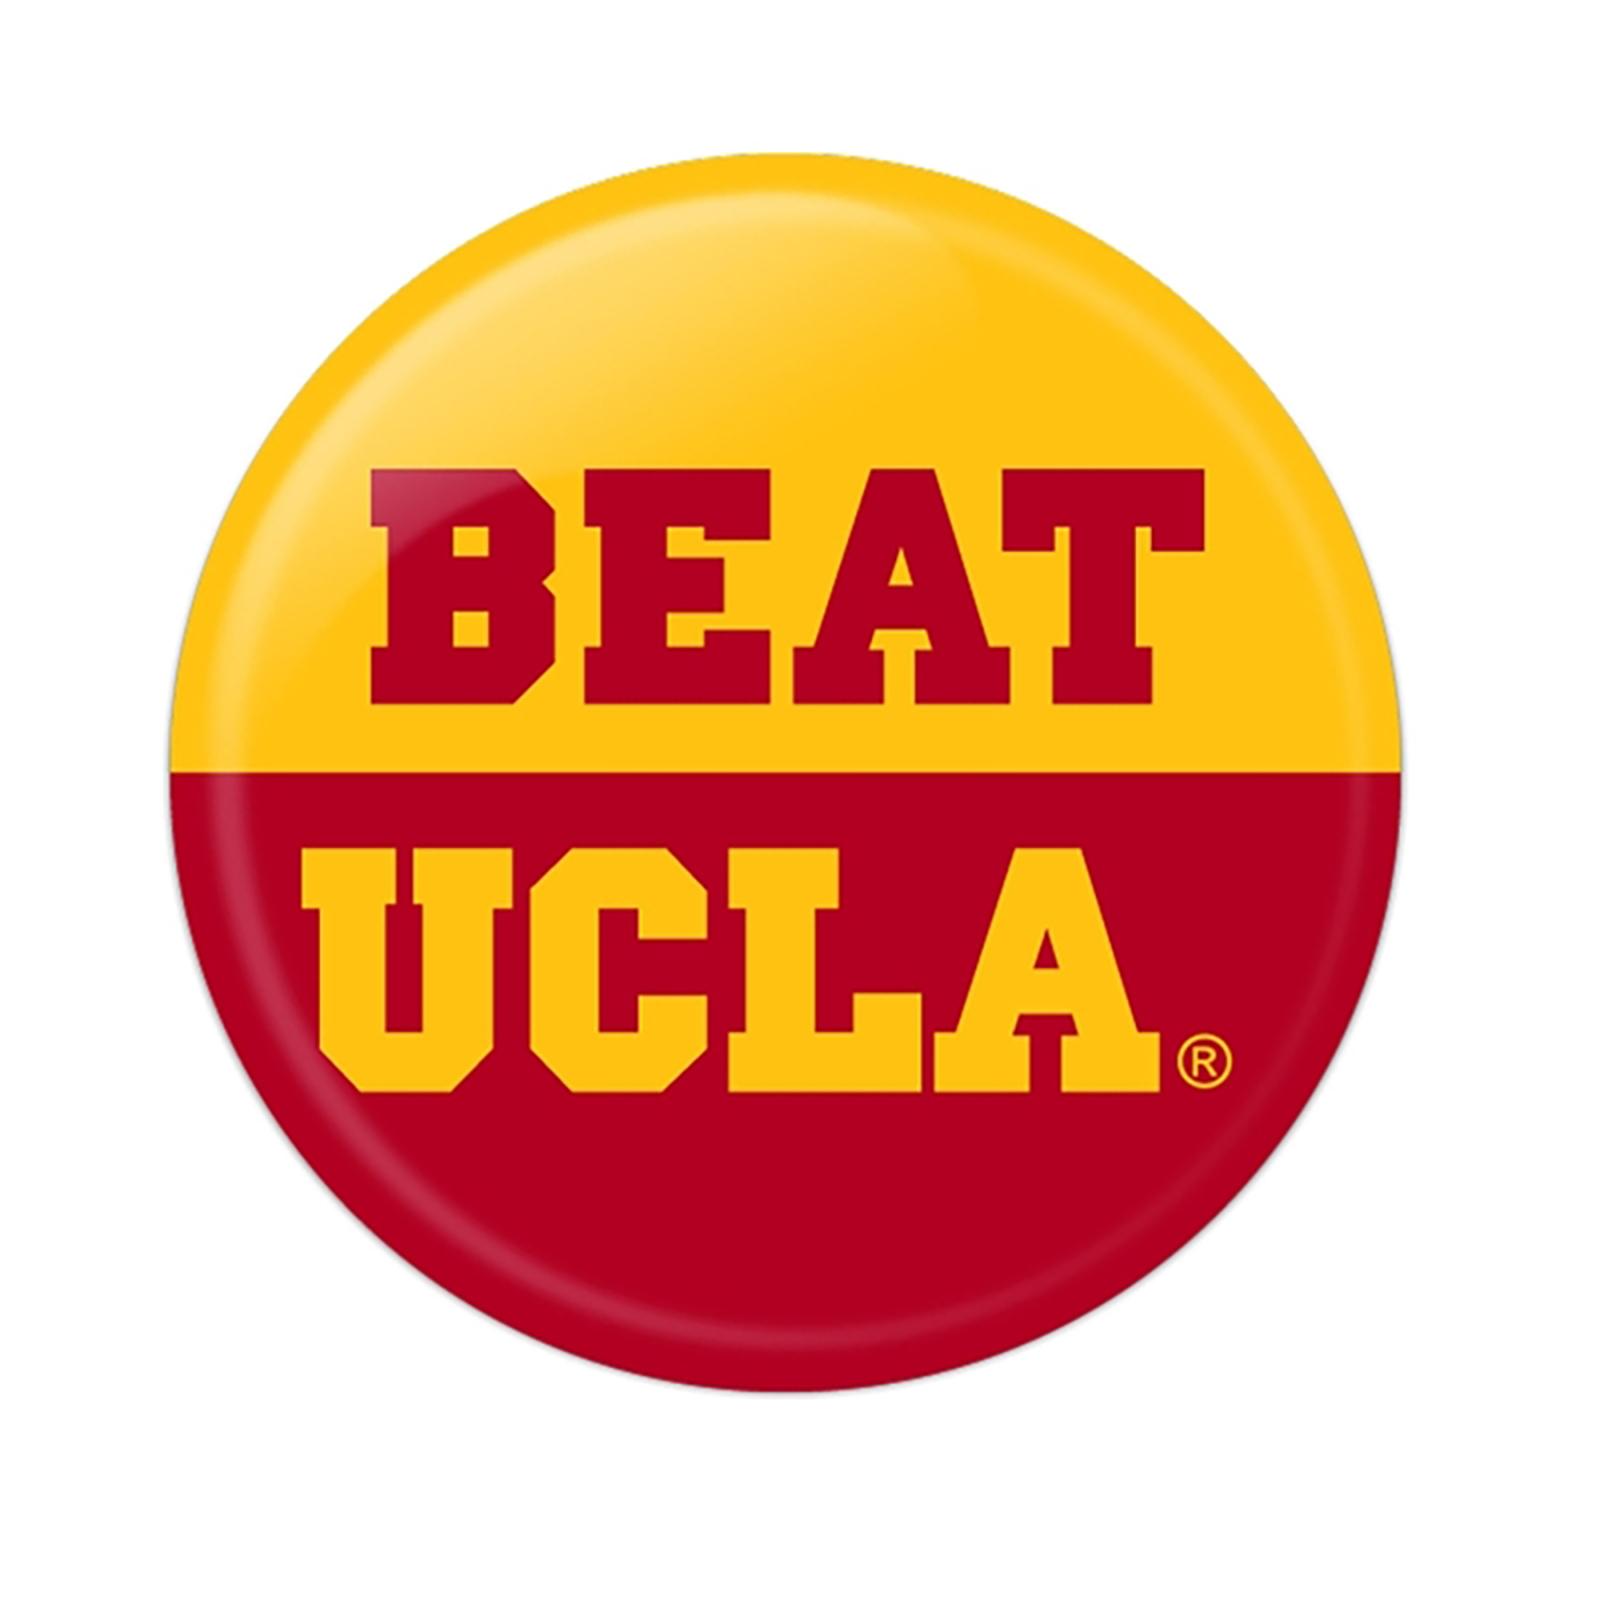 USC BEAT UCLA BUTTON C&G BY THE U image01